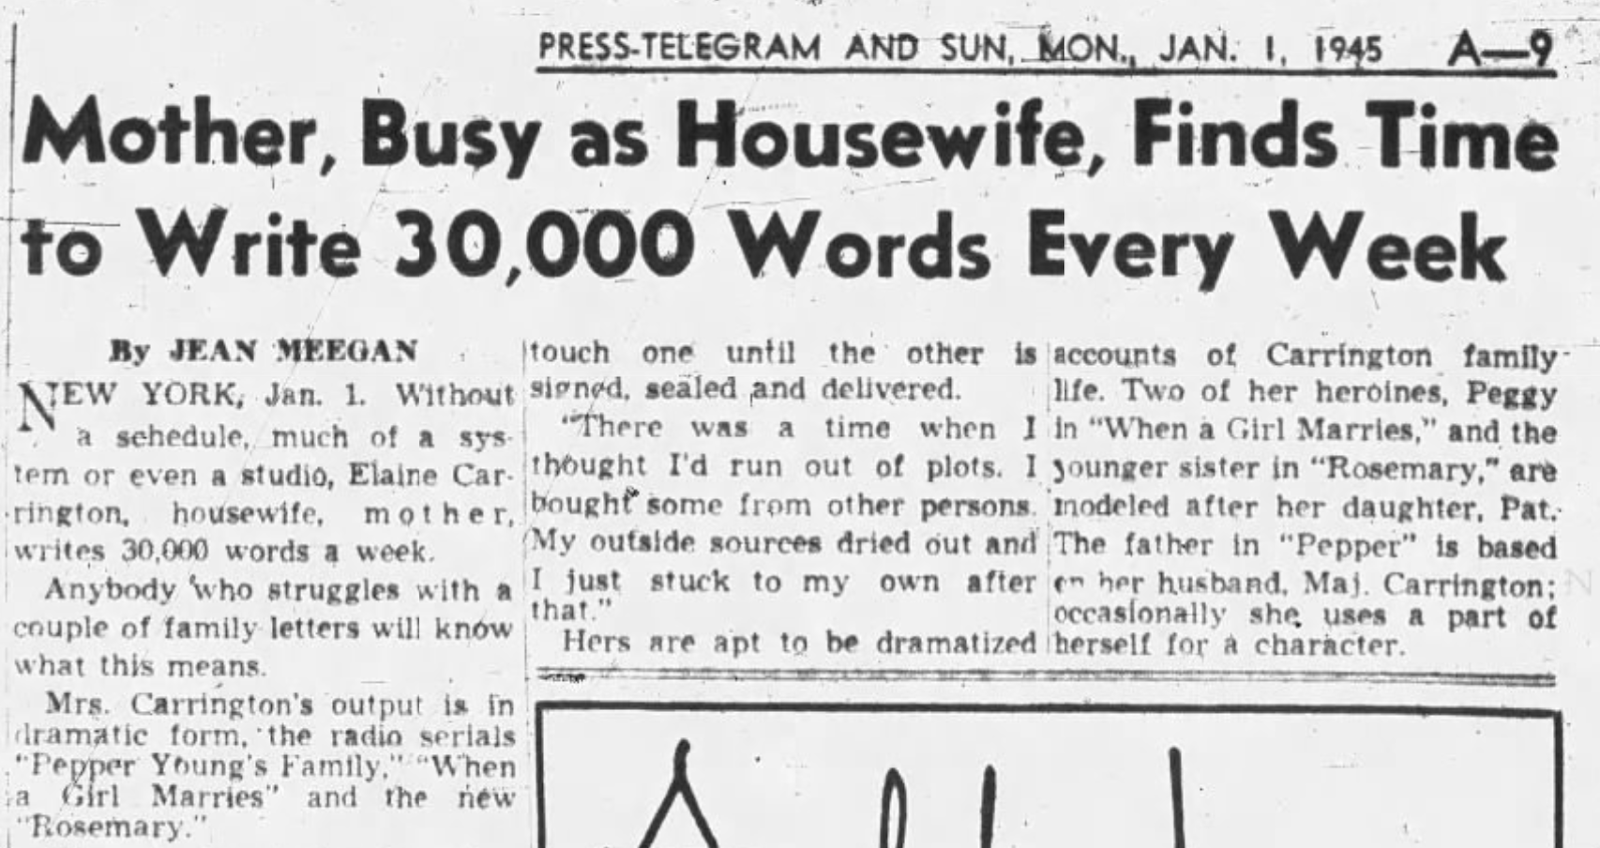 "Mother, Busy as Housewife, Finds Time to Write 30,000 Words Every Week," flabbergastingly